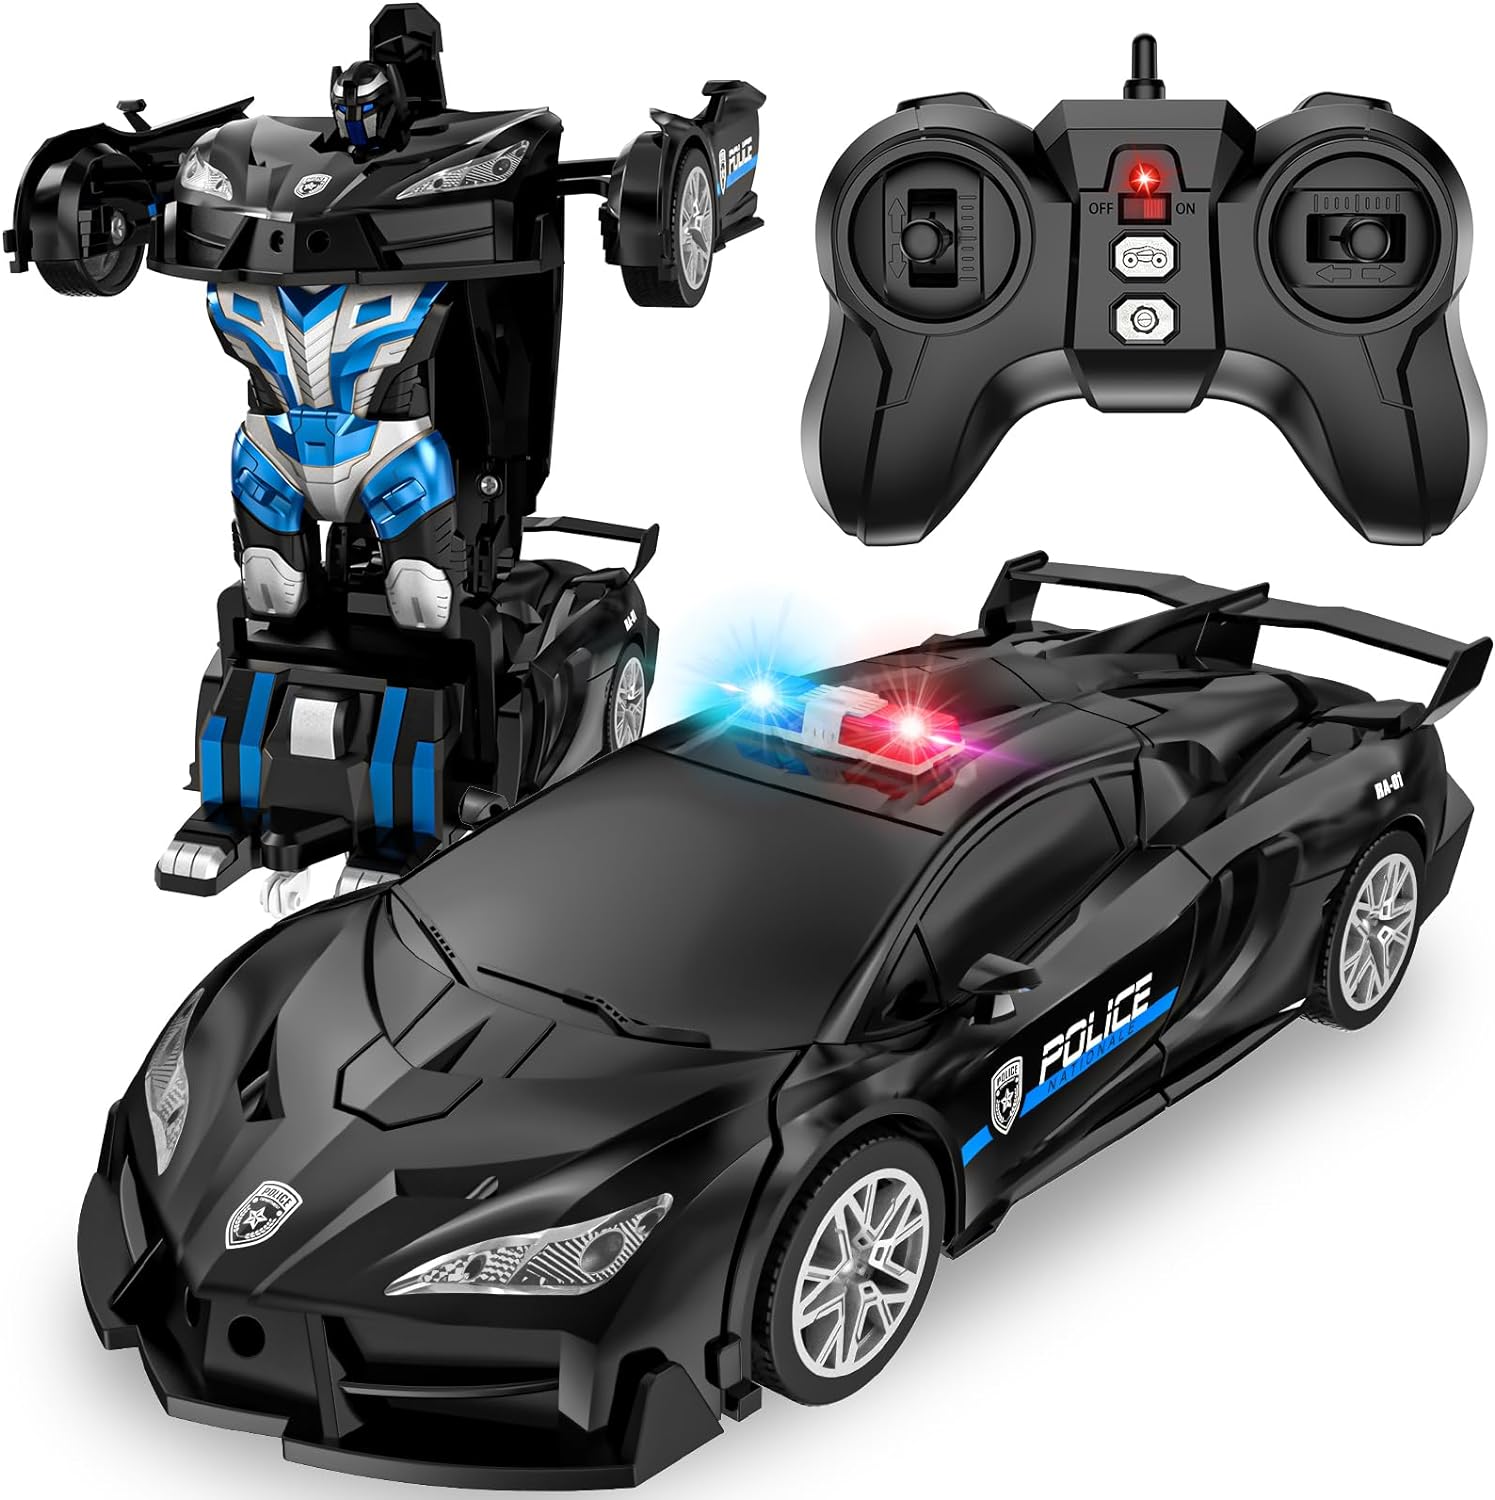 You are currently viewing LNNKINE Remote Control Car Review